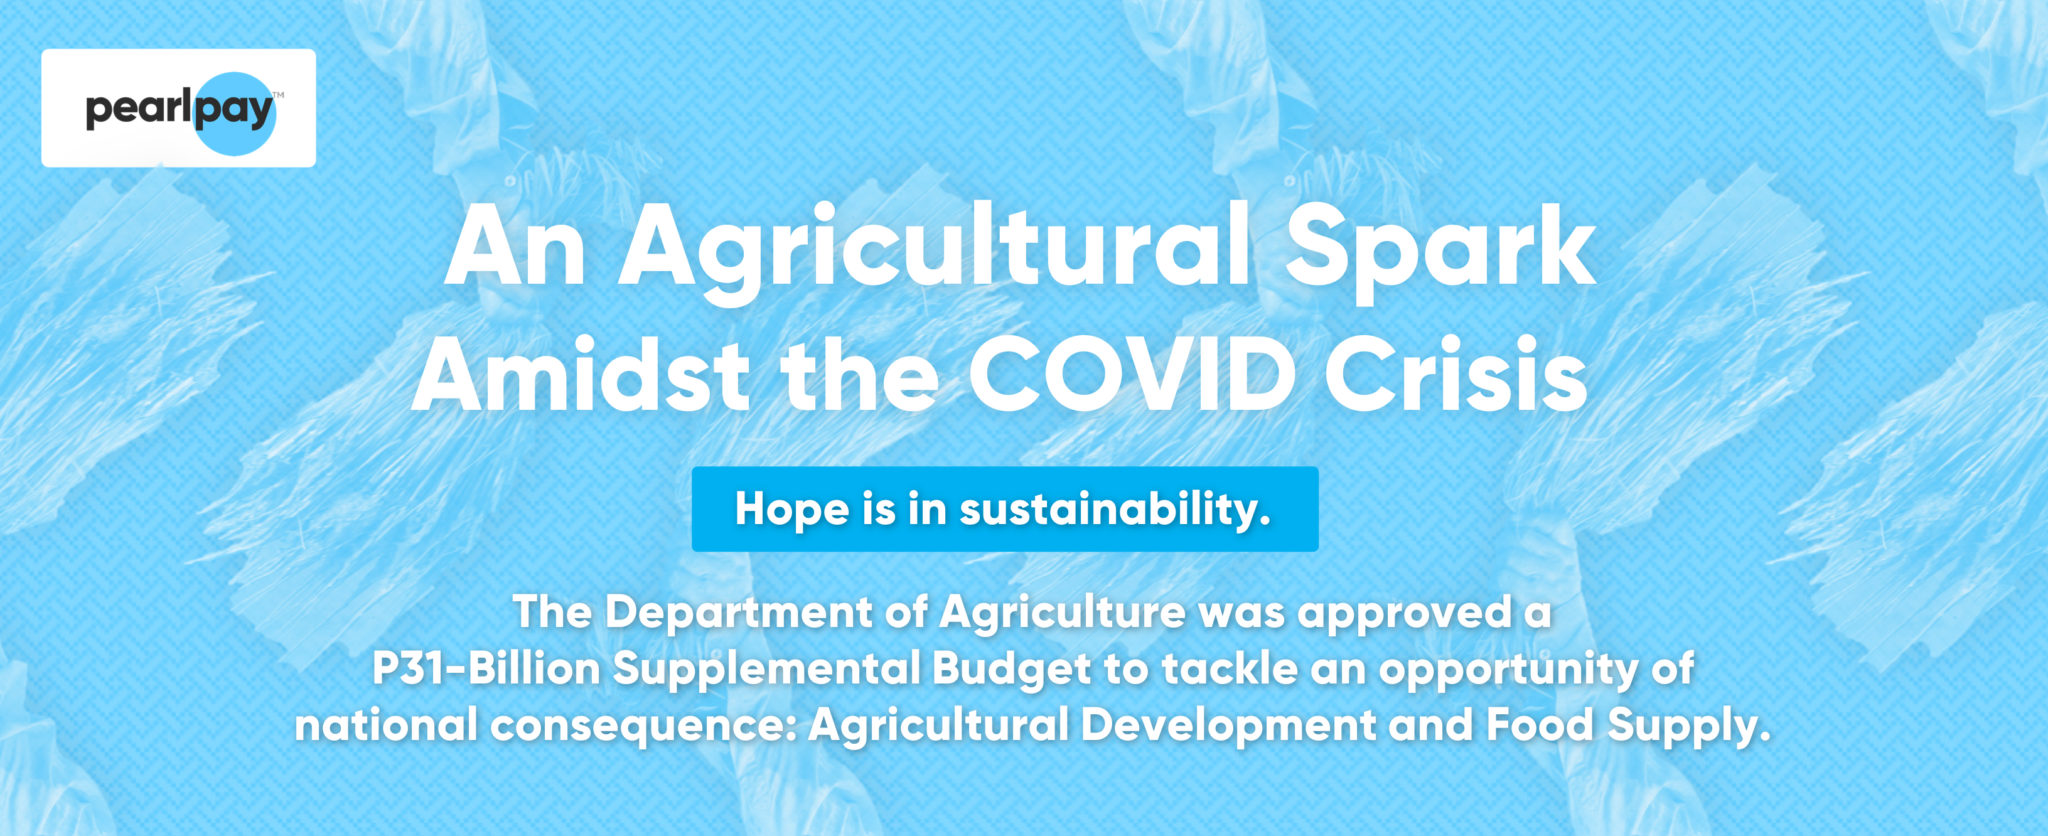 An Agricultural Spark Amidst the COVID Crisis Banner